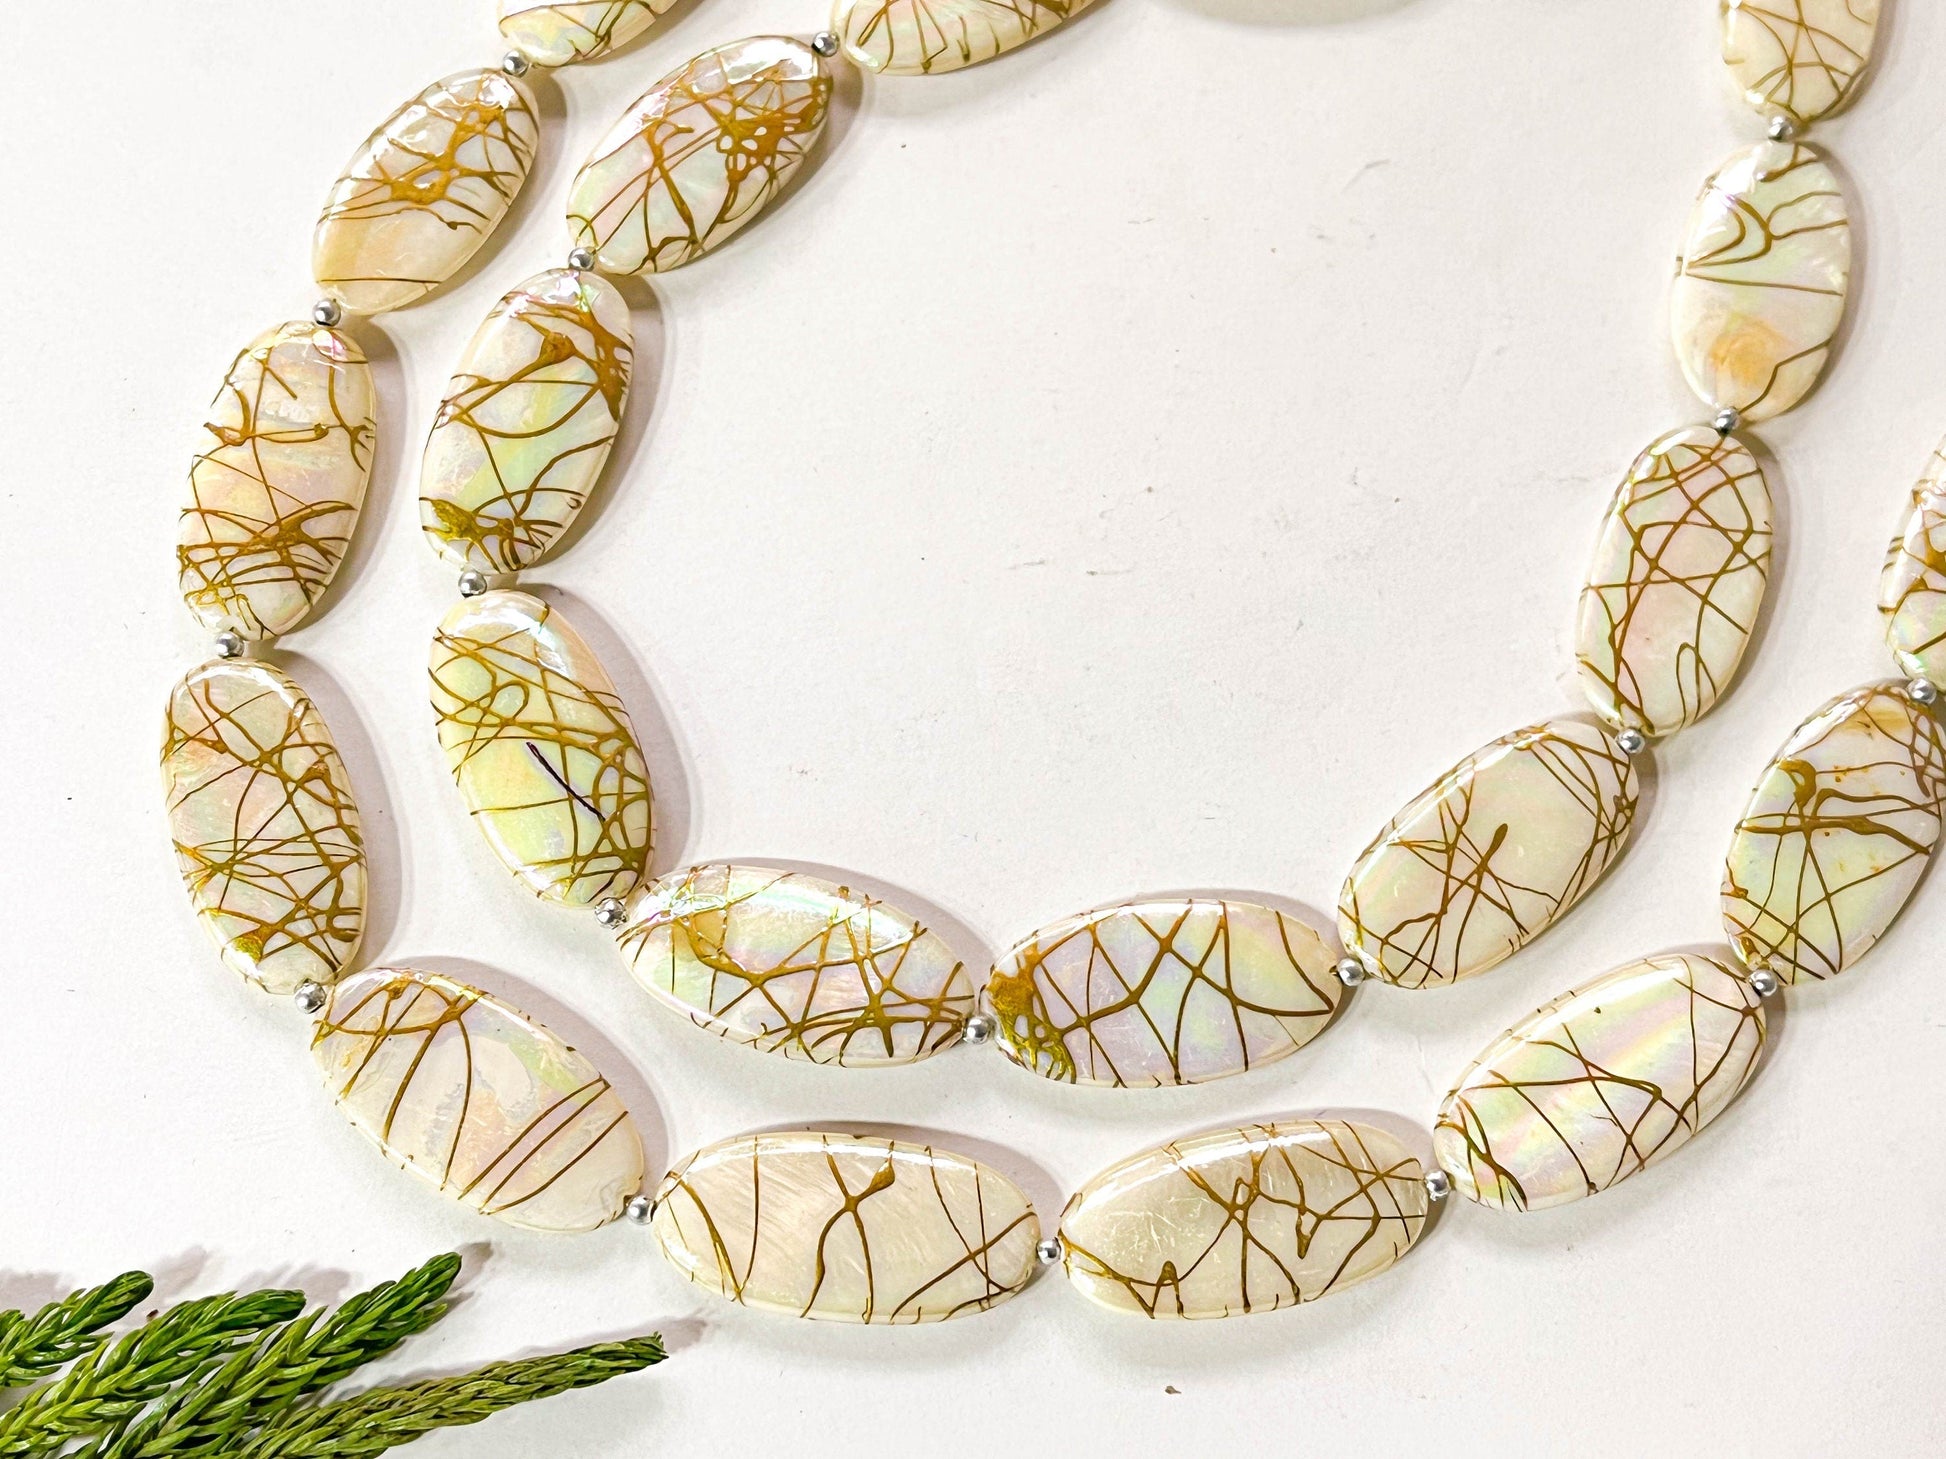 Natural Mother of Pearl with Gold Color Coating Beads | Oval Shape | 16x30mm | 12 Pieces | 15 Inches | Beadsforyourjewellery Beadsforyourjewelry